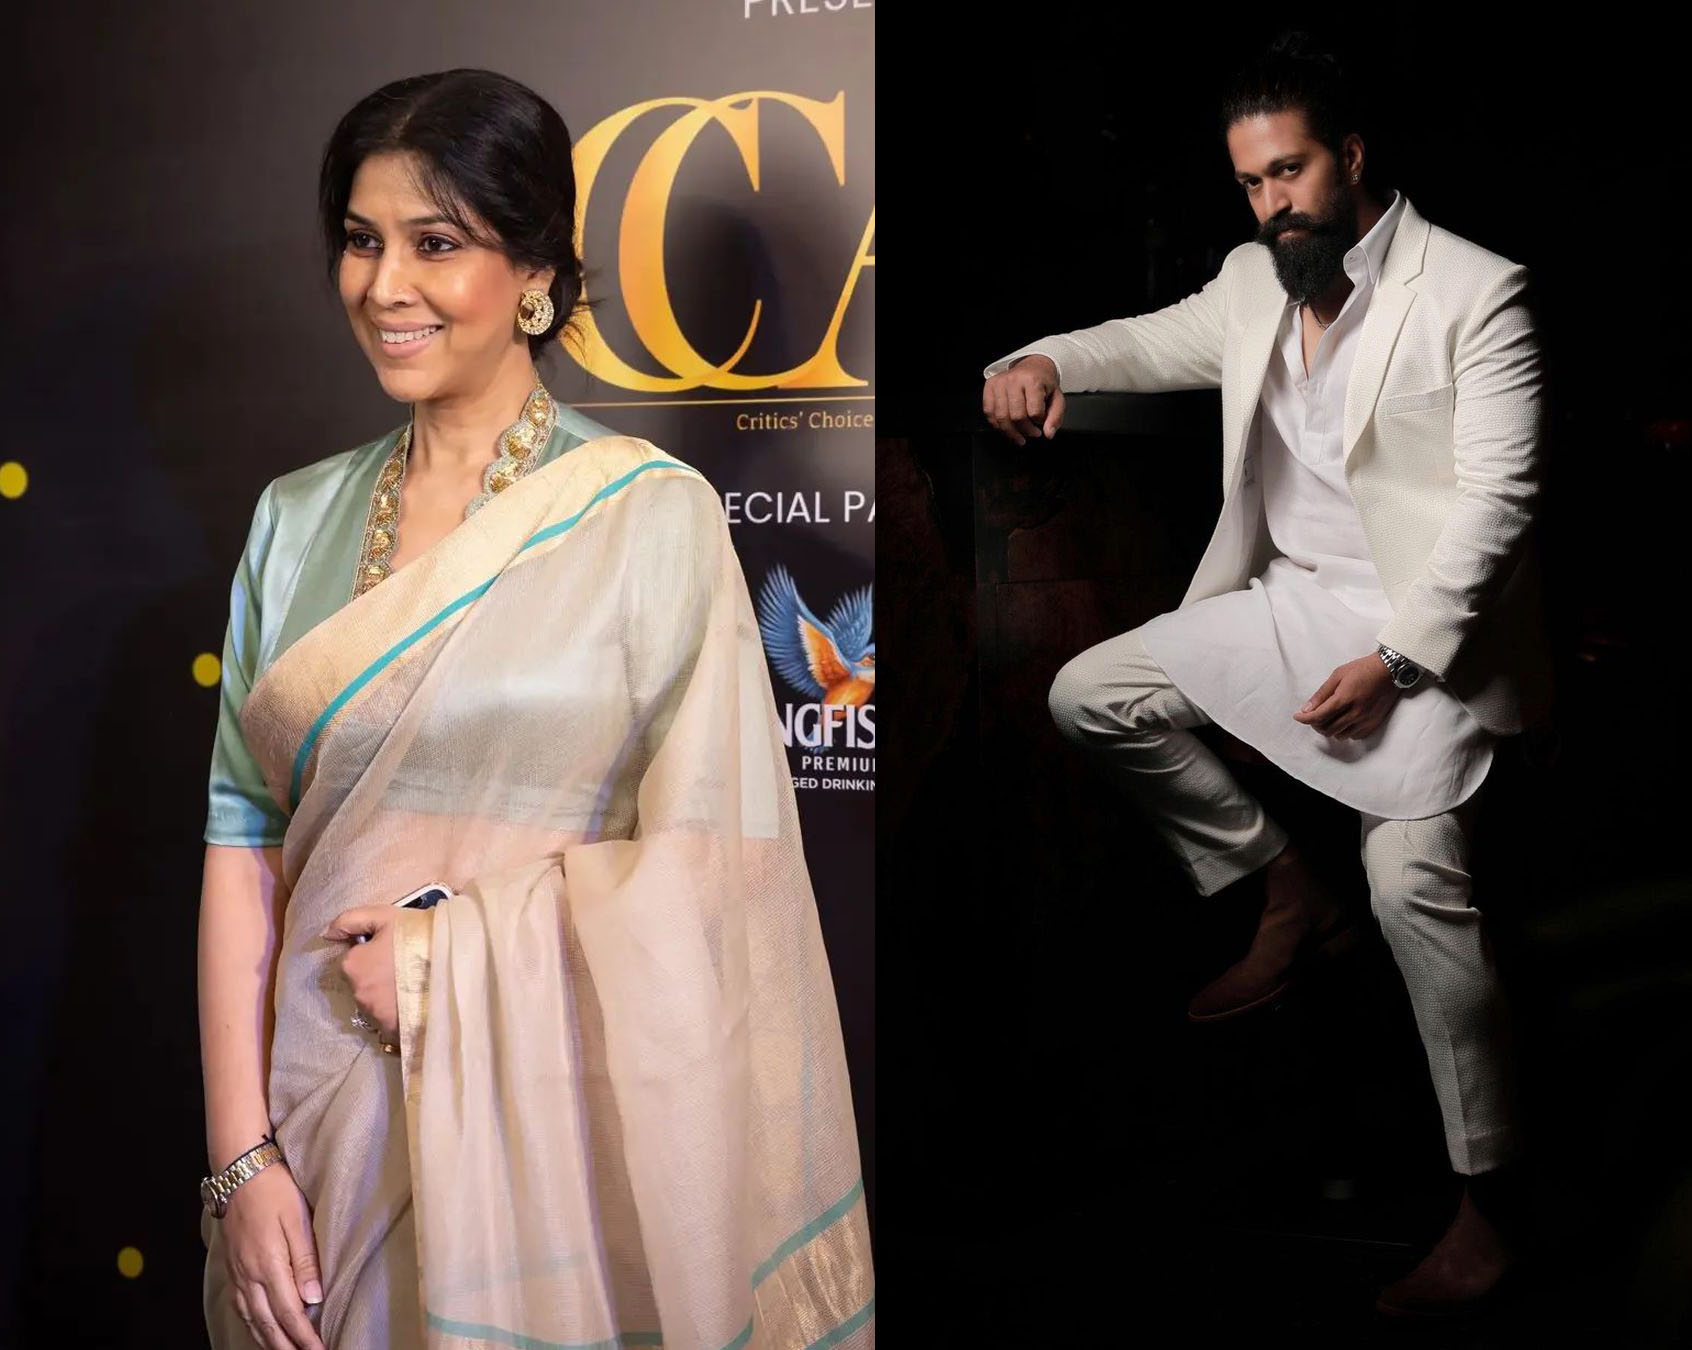 Here The Big News For All The Sakshi Tanwar Fans Out There! Report Says Our Queen Gonna Paired Opposite To KGF Star Yash In Ramayana. Is It True?